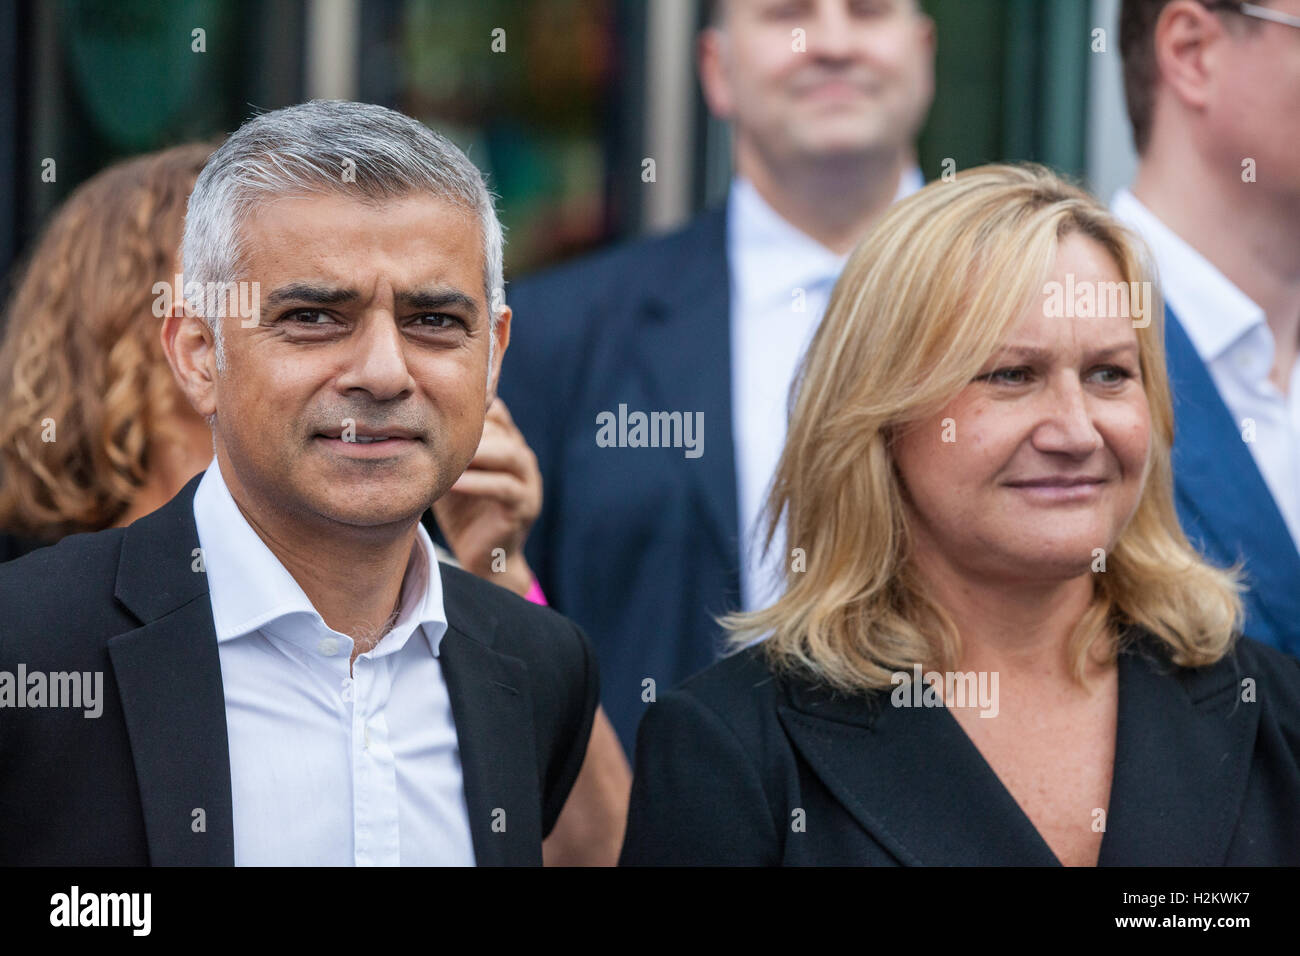 London, UK. 29th September, 2016. The Mayor of London, Sadiq Khan, launches the new London Curriculum for primary schools at the London Curriculum Festival at the Scoop, accompanied by Yelena Baturina, founder of the Be Open Foundation. More than 1,800 primary schools across 33 London boroughs will be able to bring learning to life, inspired by London’s people, places and heritage, as part of the new ‘Going Underground’ unit on the London Curriculum. © Mark Kerrison/Alamy Live News Credit:  Mark Kerrison/Alamy Live News Stock Photo